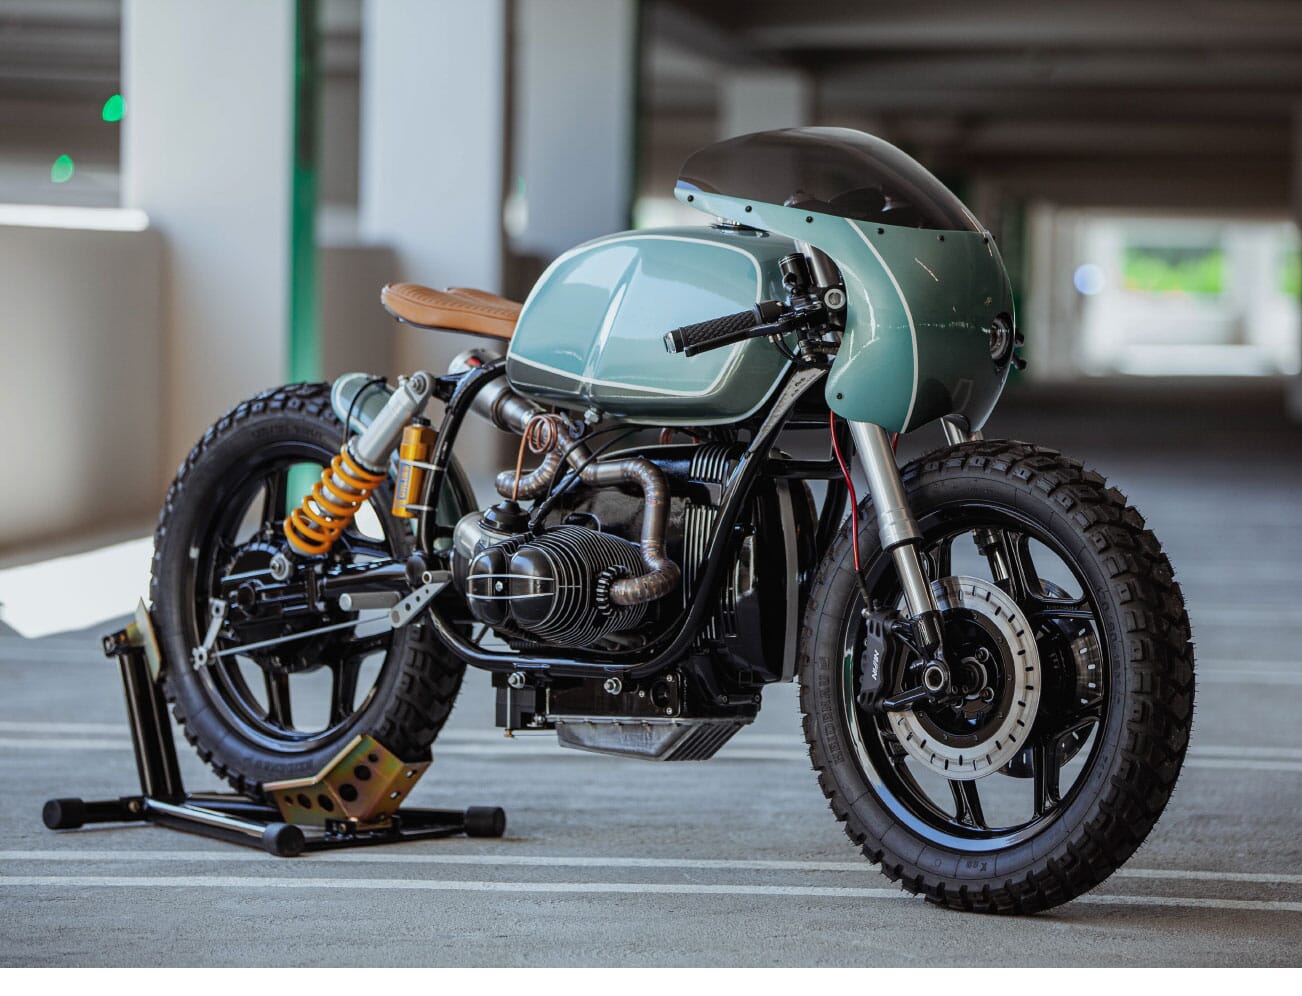 In The Ring With Upcycle'S Boxer Twin Bmw R100 Café Racers | Opumo Magazine